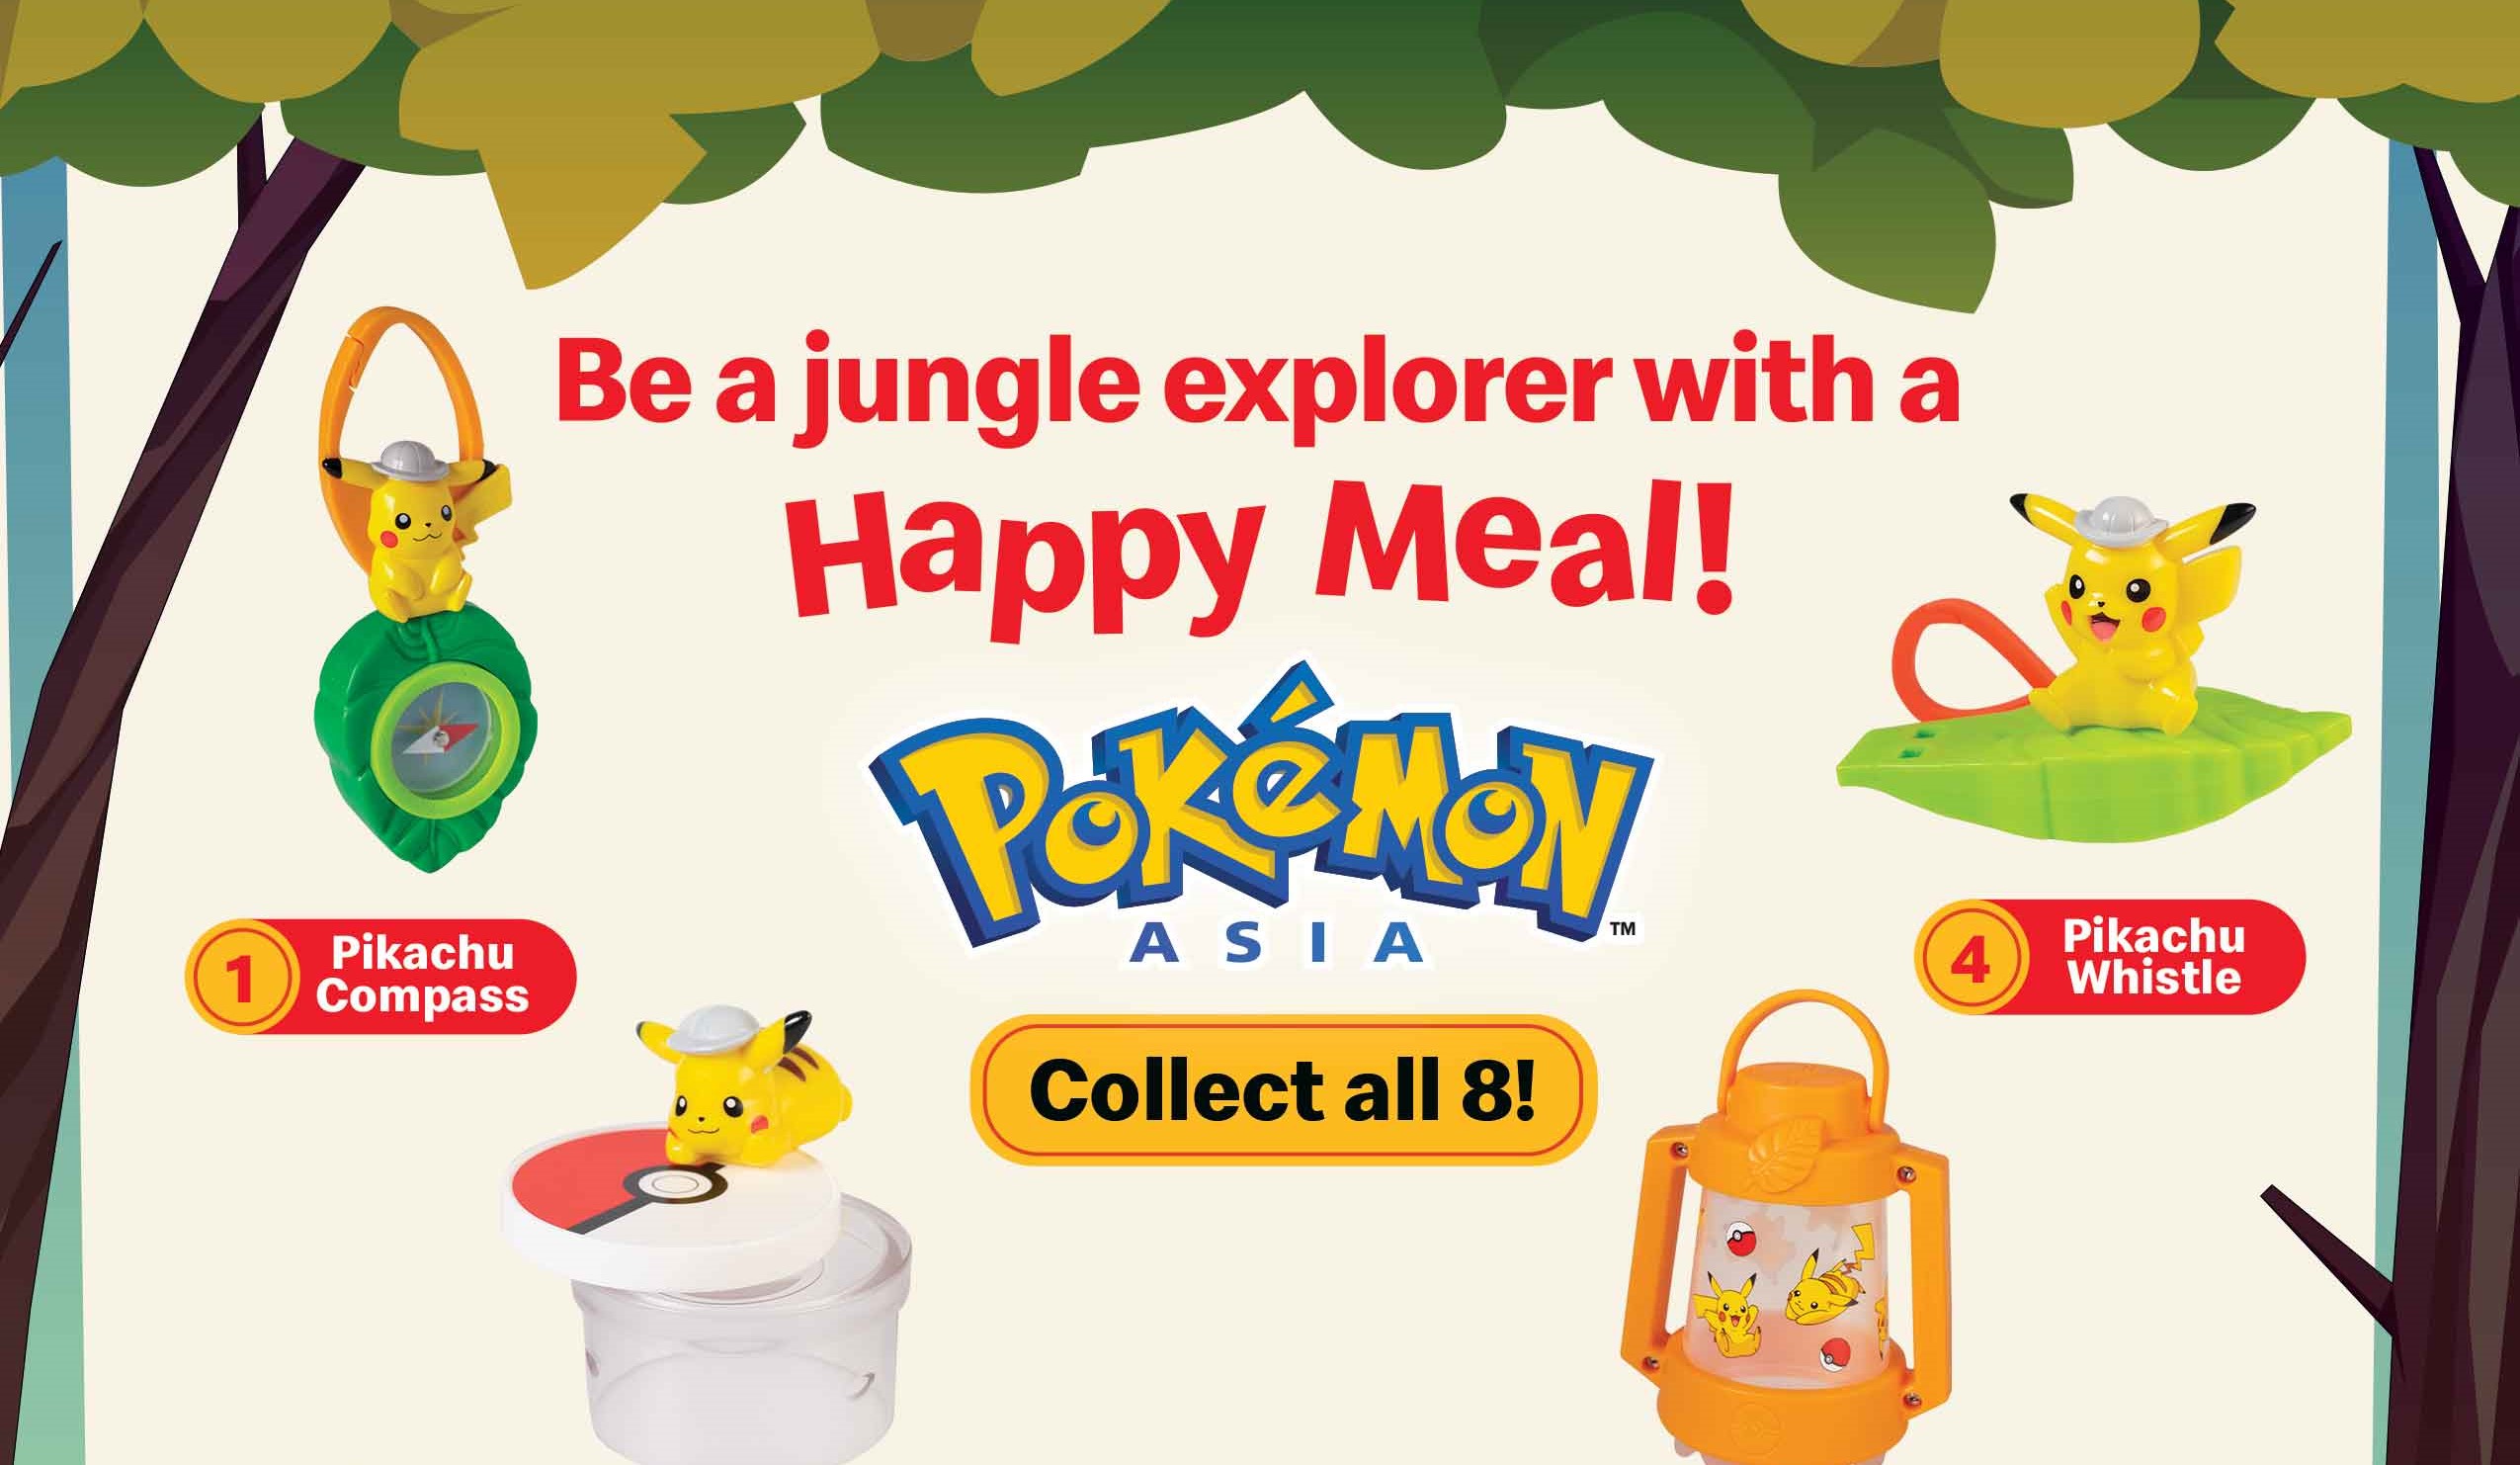 Let’s go Christmas camping with Pikachu with McDonald’s new Happy Meal toy collectibles